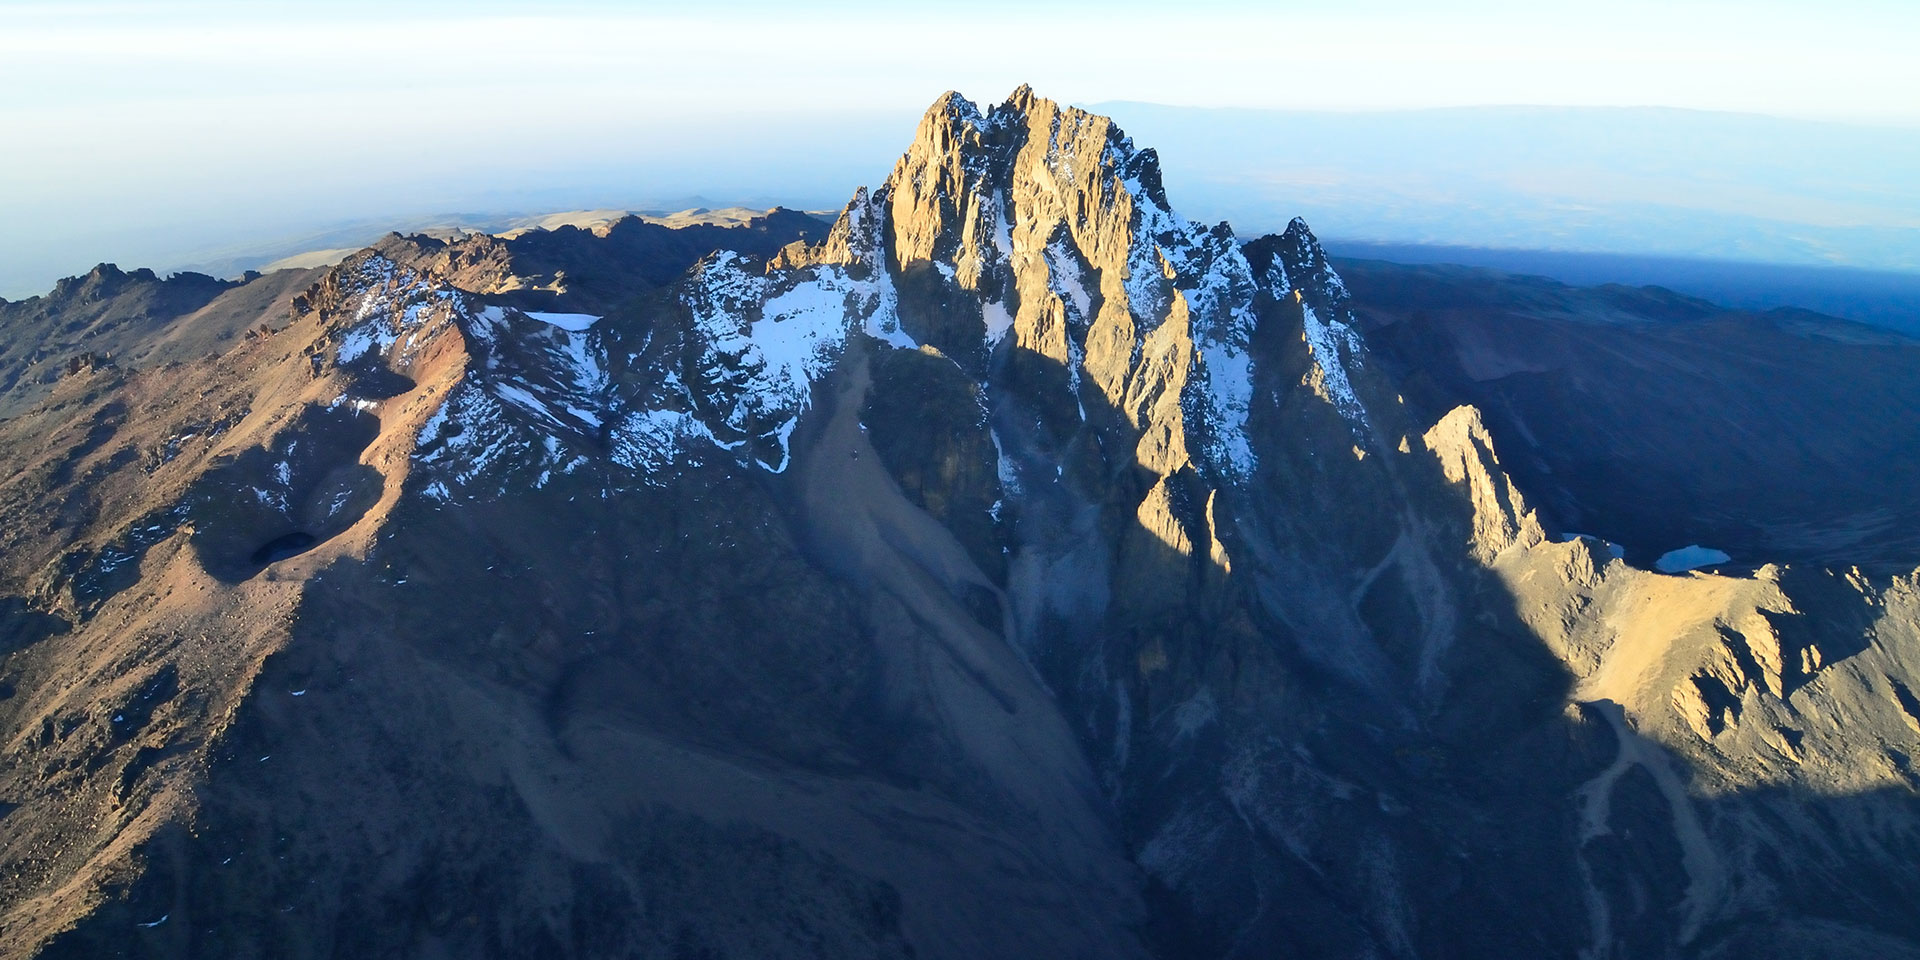 Mount Kenya Climbing – Guide on Preparation, Routes and What to Expect